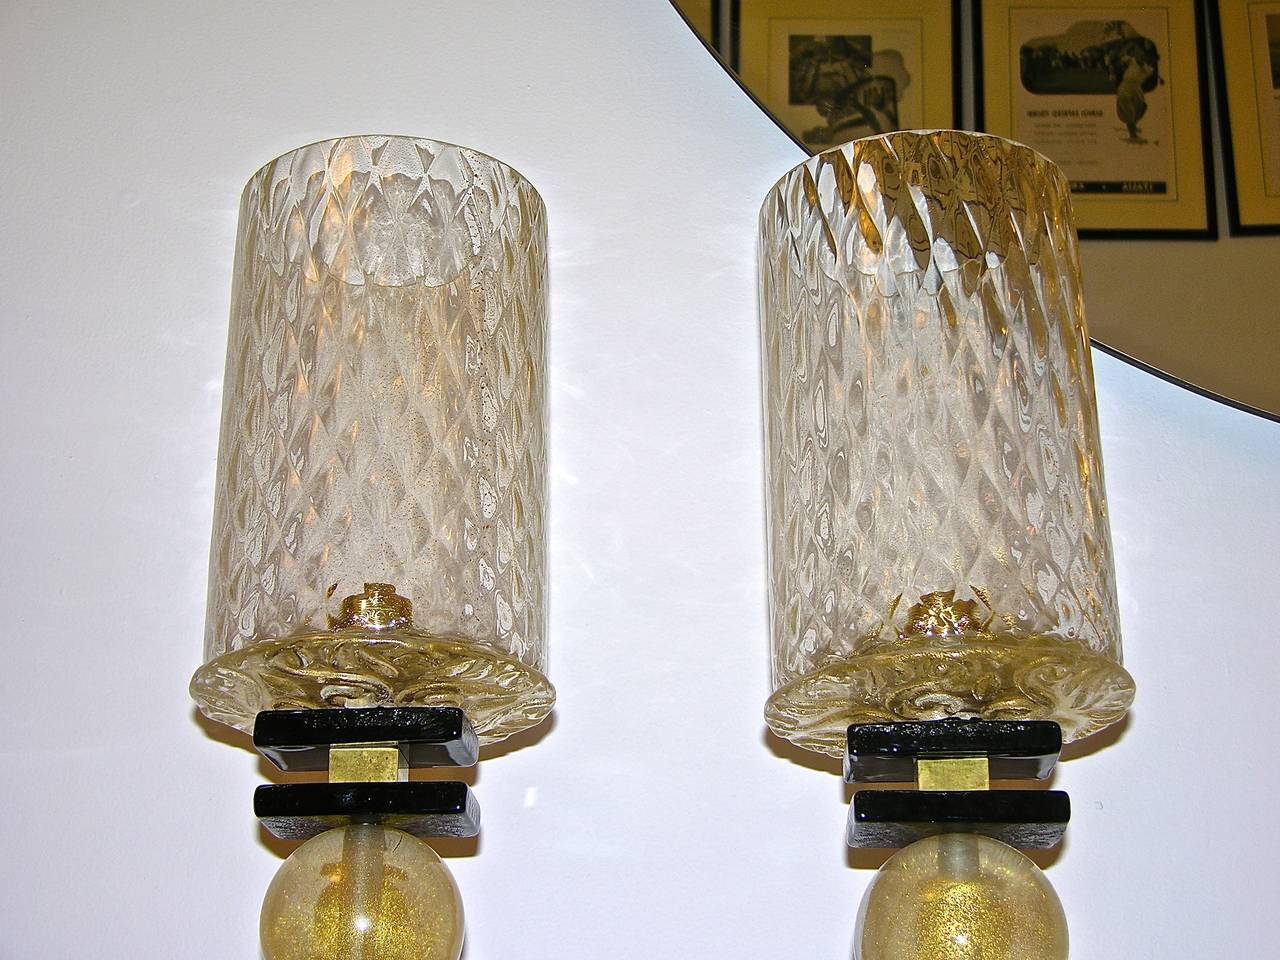 1970s Italian Pair of Art Deco Design Lamps with Murano Glass Shades by Barovier 1